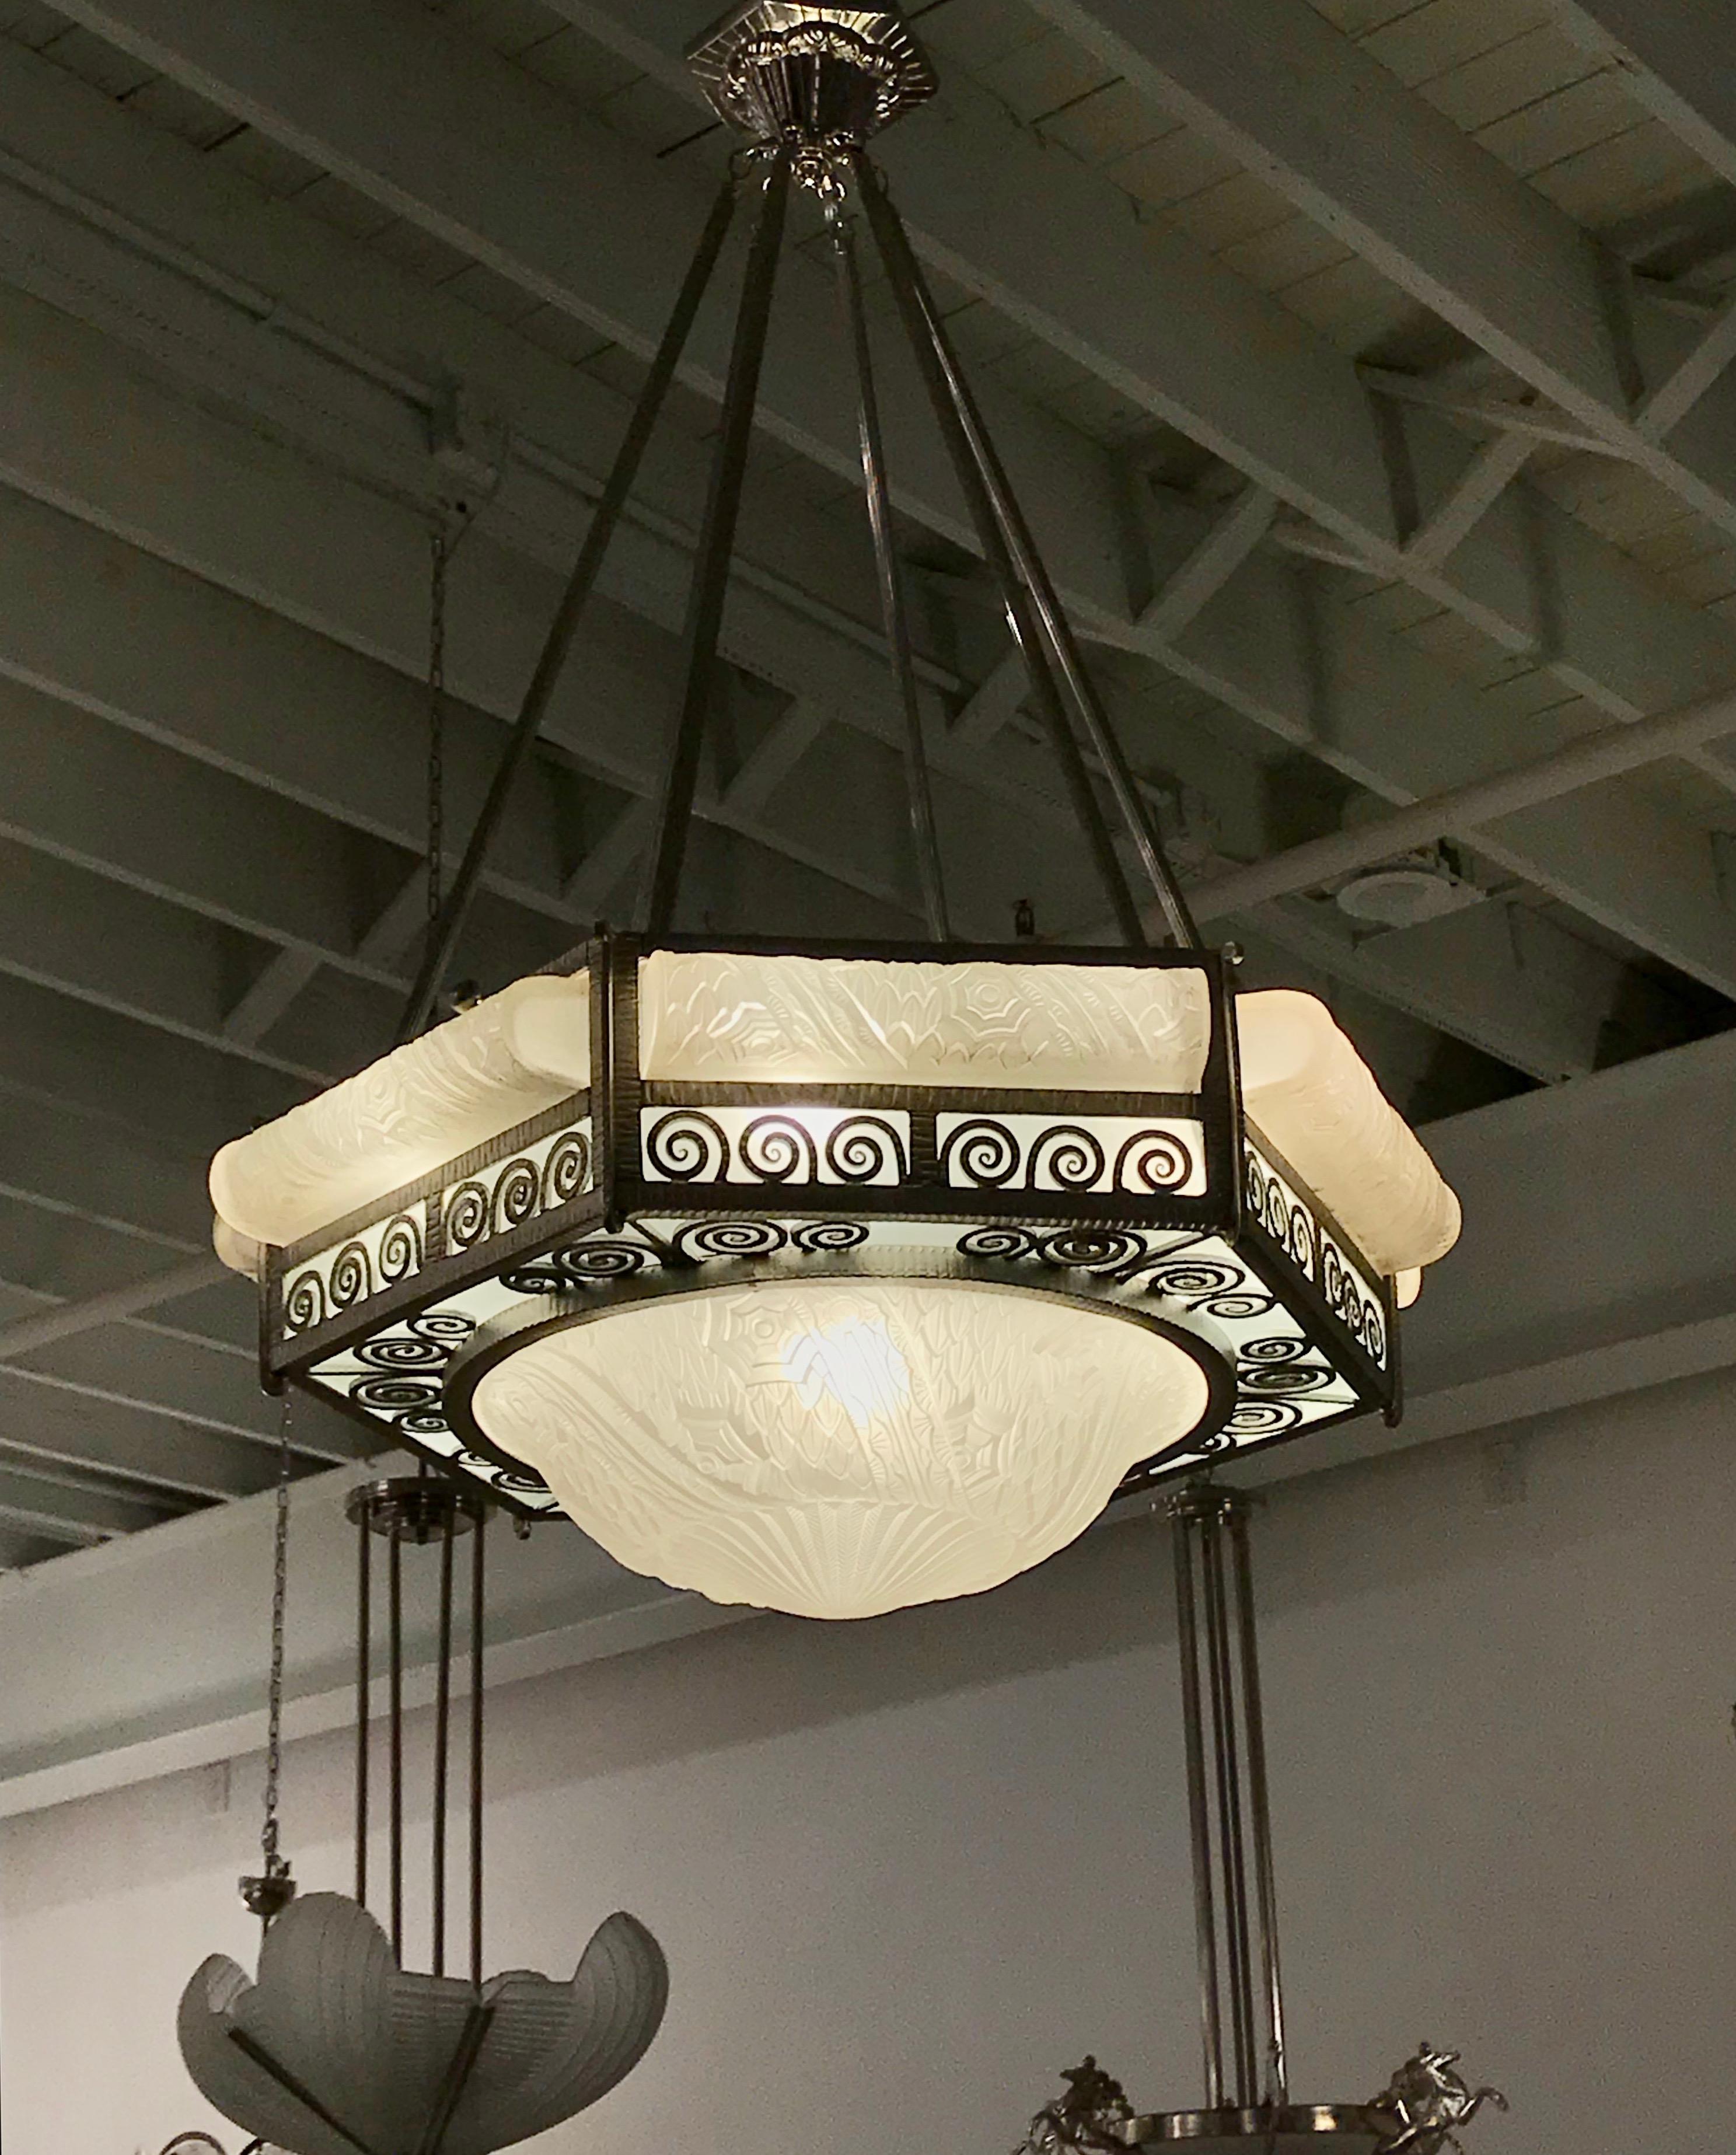 Grand French Art Deco chandelier by the French Artist Charles Schneider. With a hexagon shaped nickel bronze frame, embracing six horizontal oblong glass shades with matching central coupe. The glass shades are in clear frosted with polish details